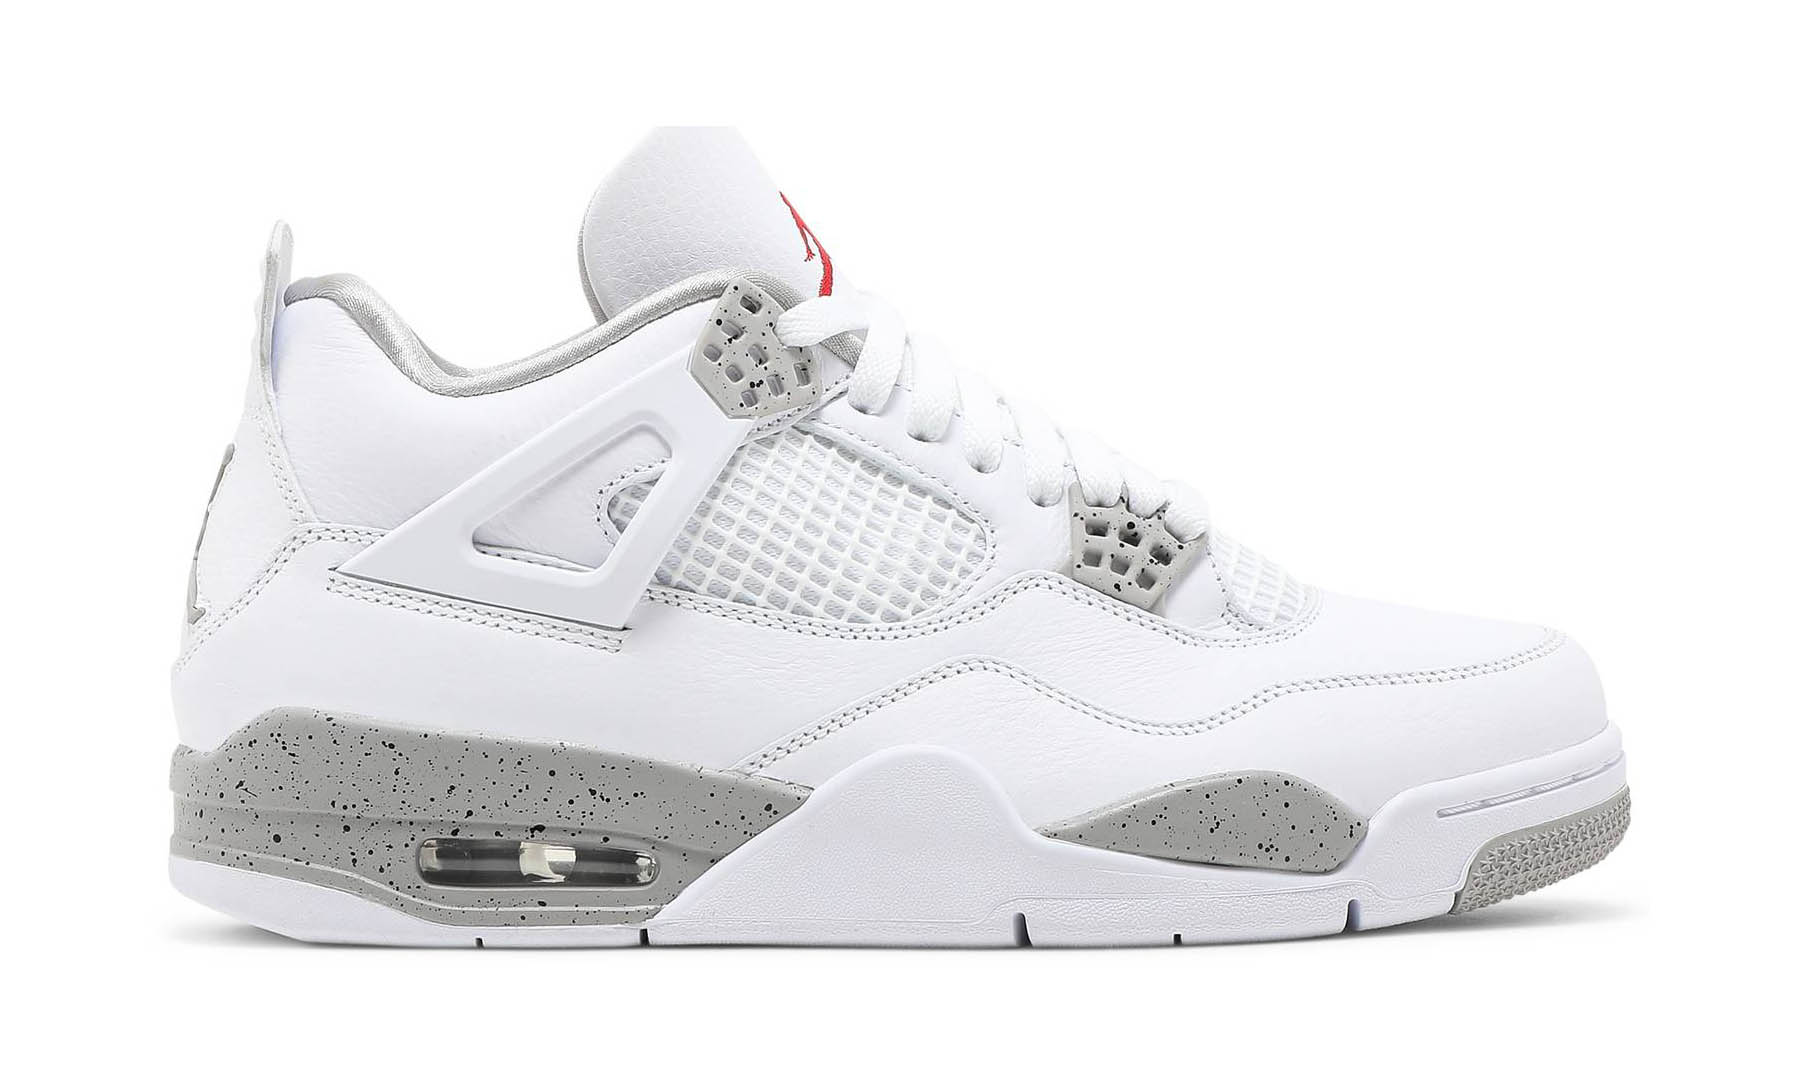 Wording repent Filth Air Jordan 4 Retro White Oreo: Does It Live Up To The Hype?